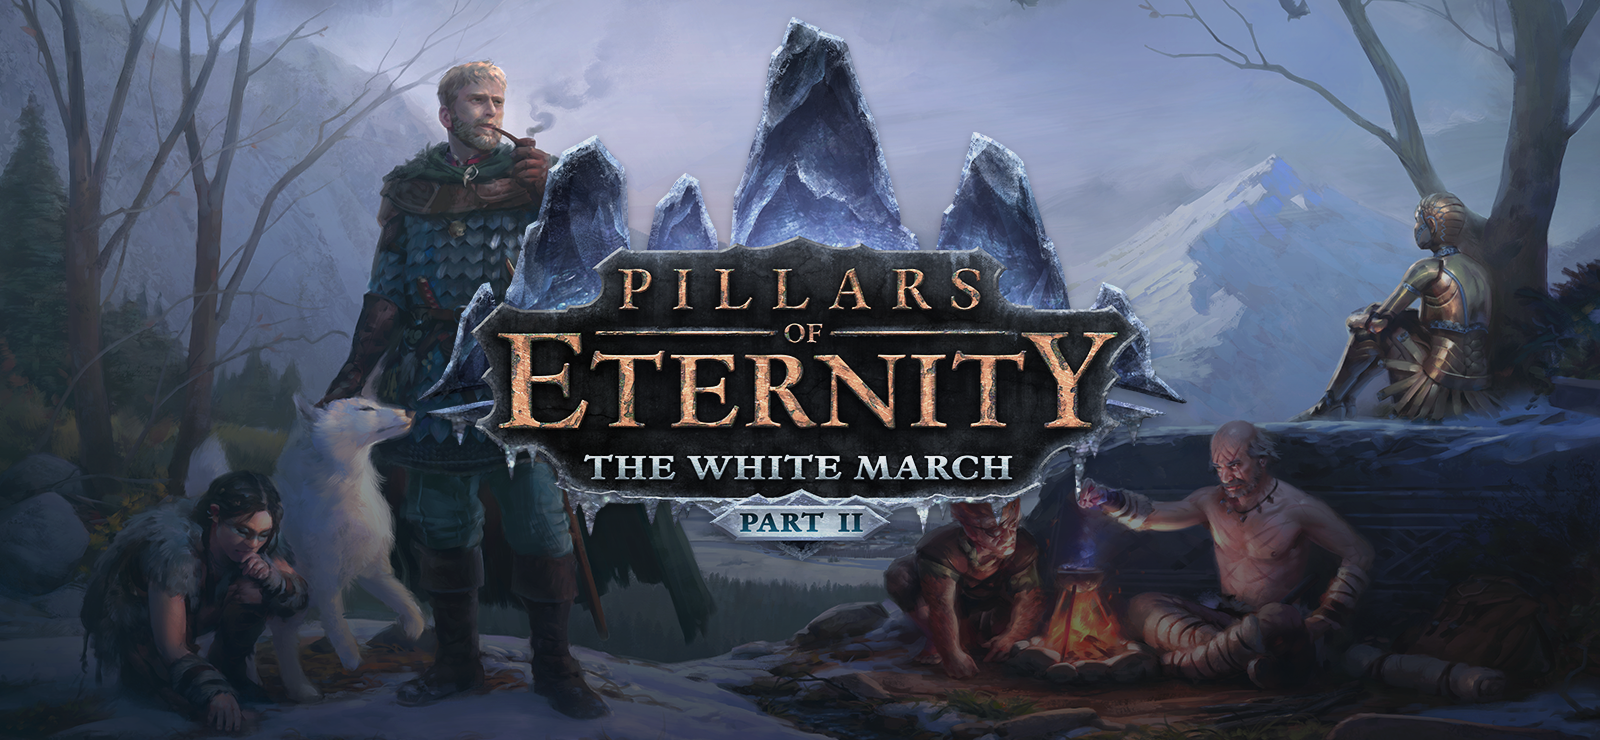 Pillars Of Eternity: The White March - Part II